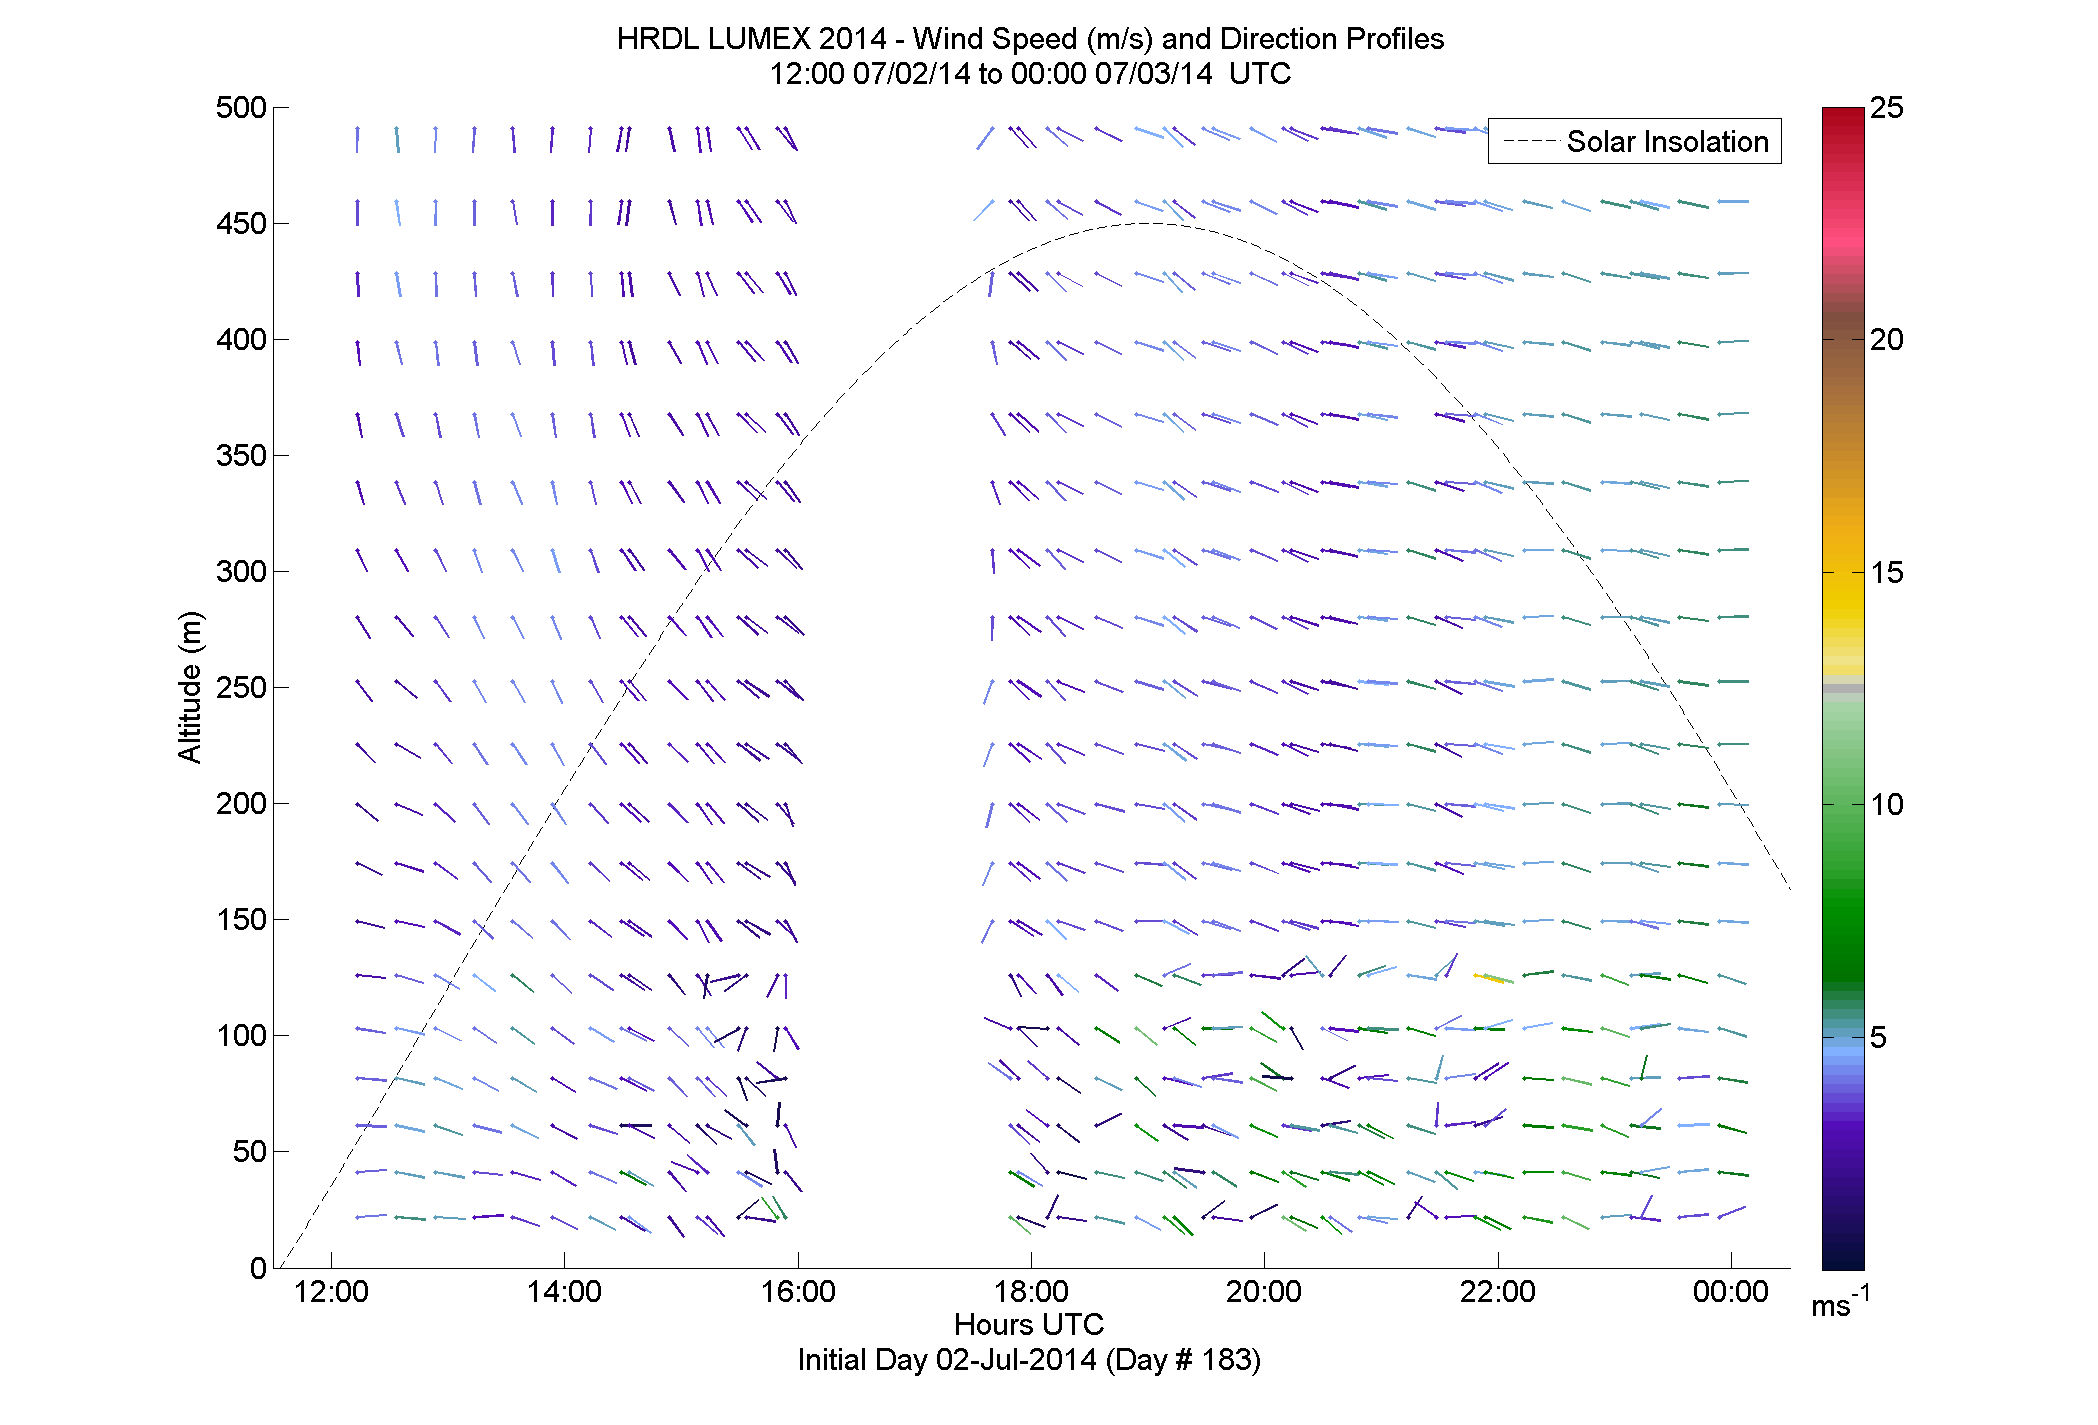 HRDL speed and direction profile - July 2 pm